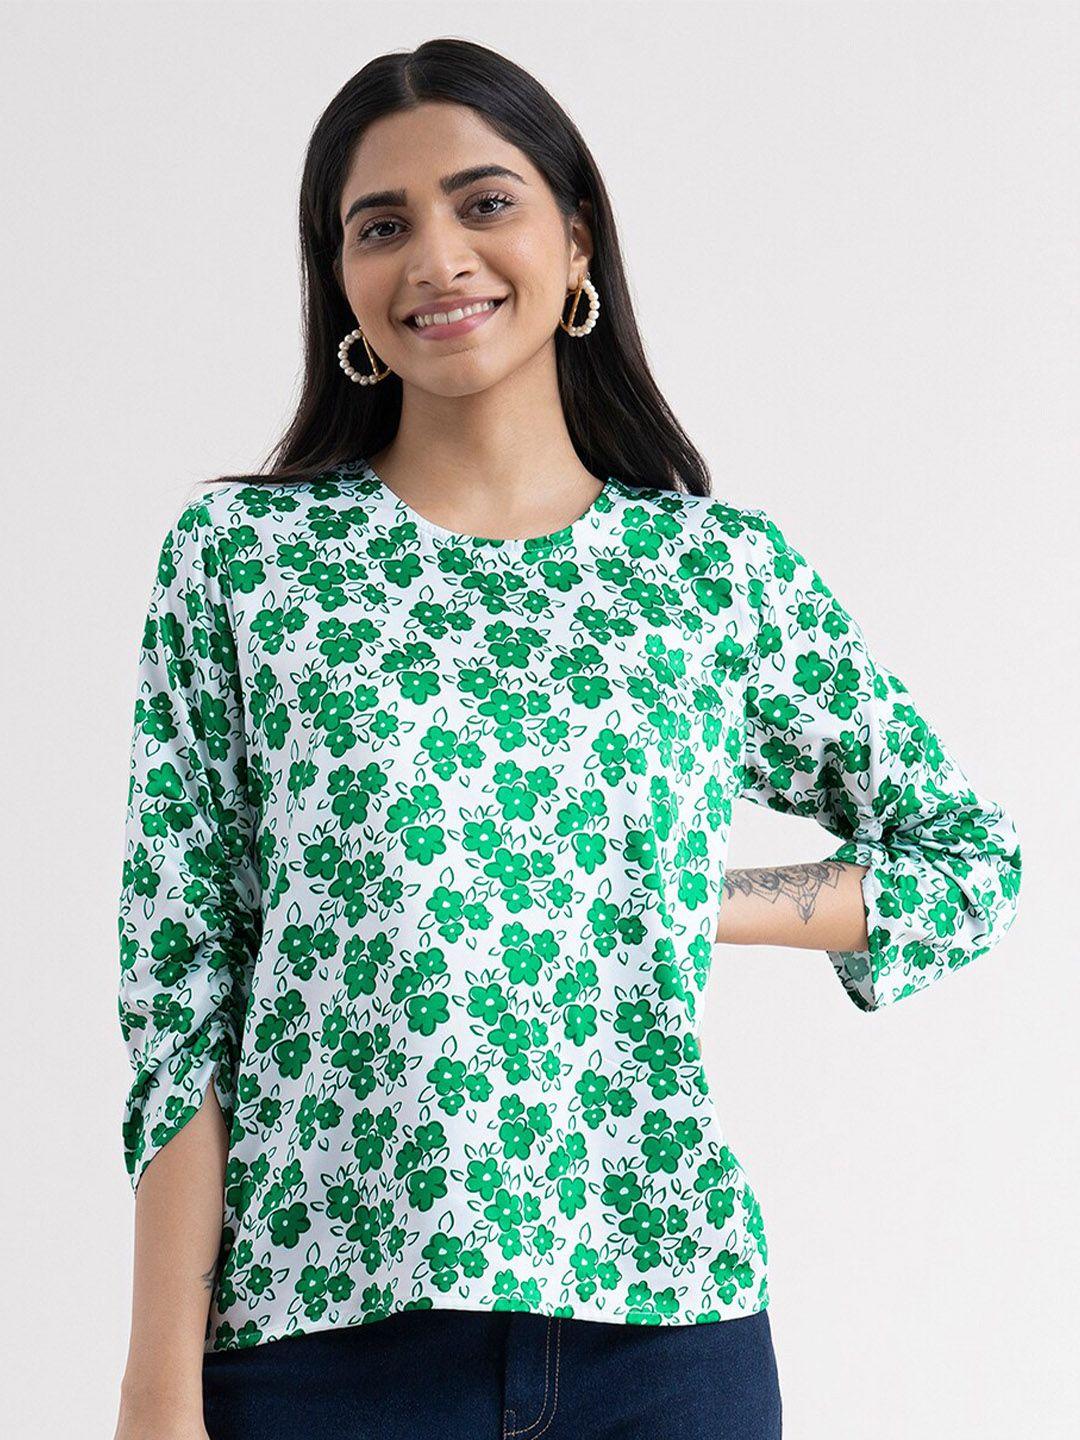 fablestreet white & green floral print satin top